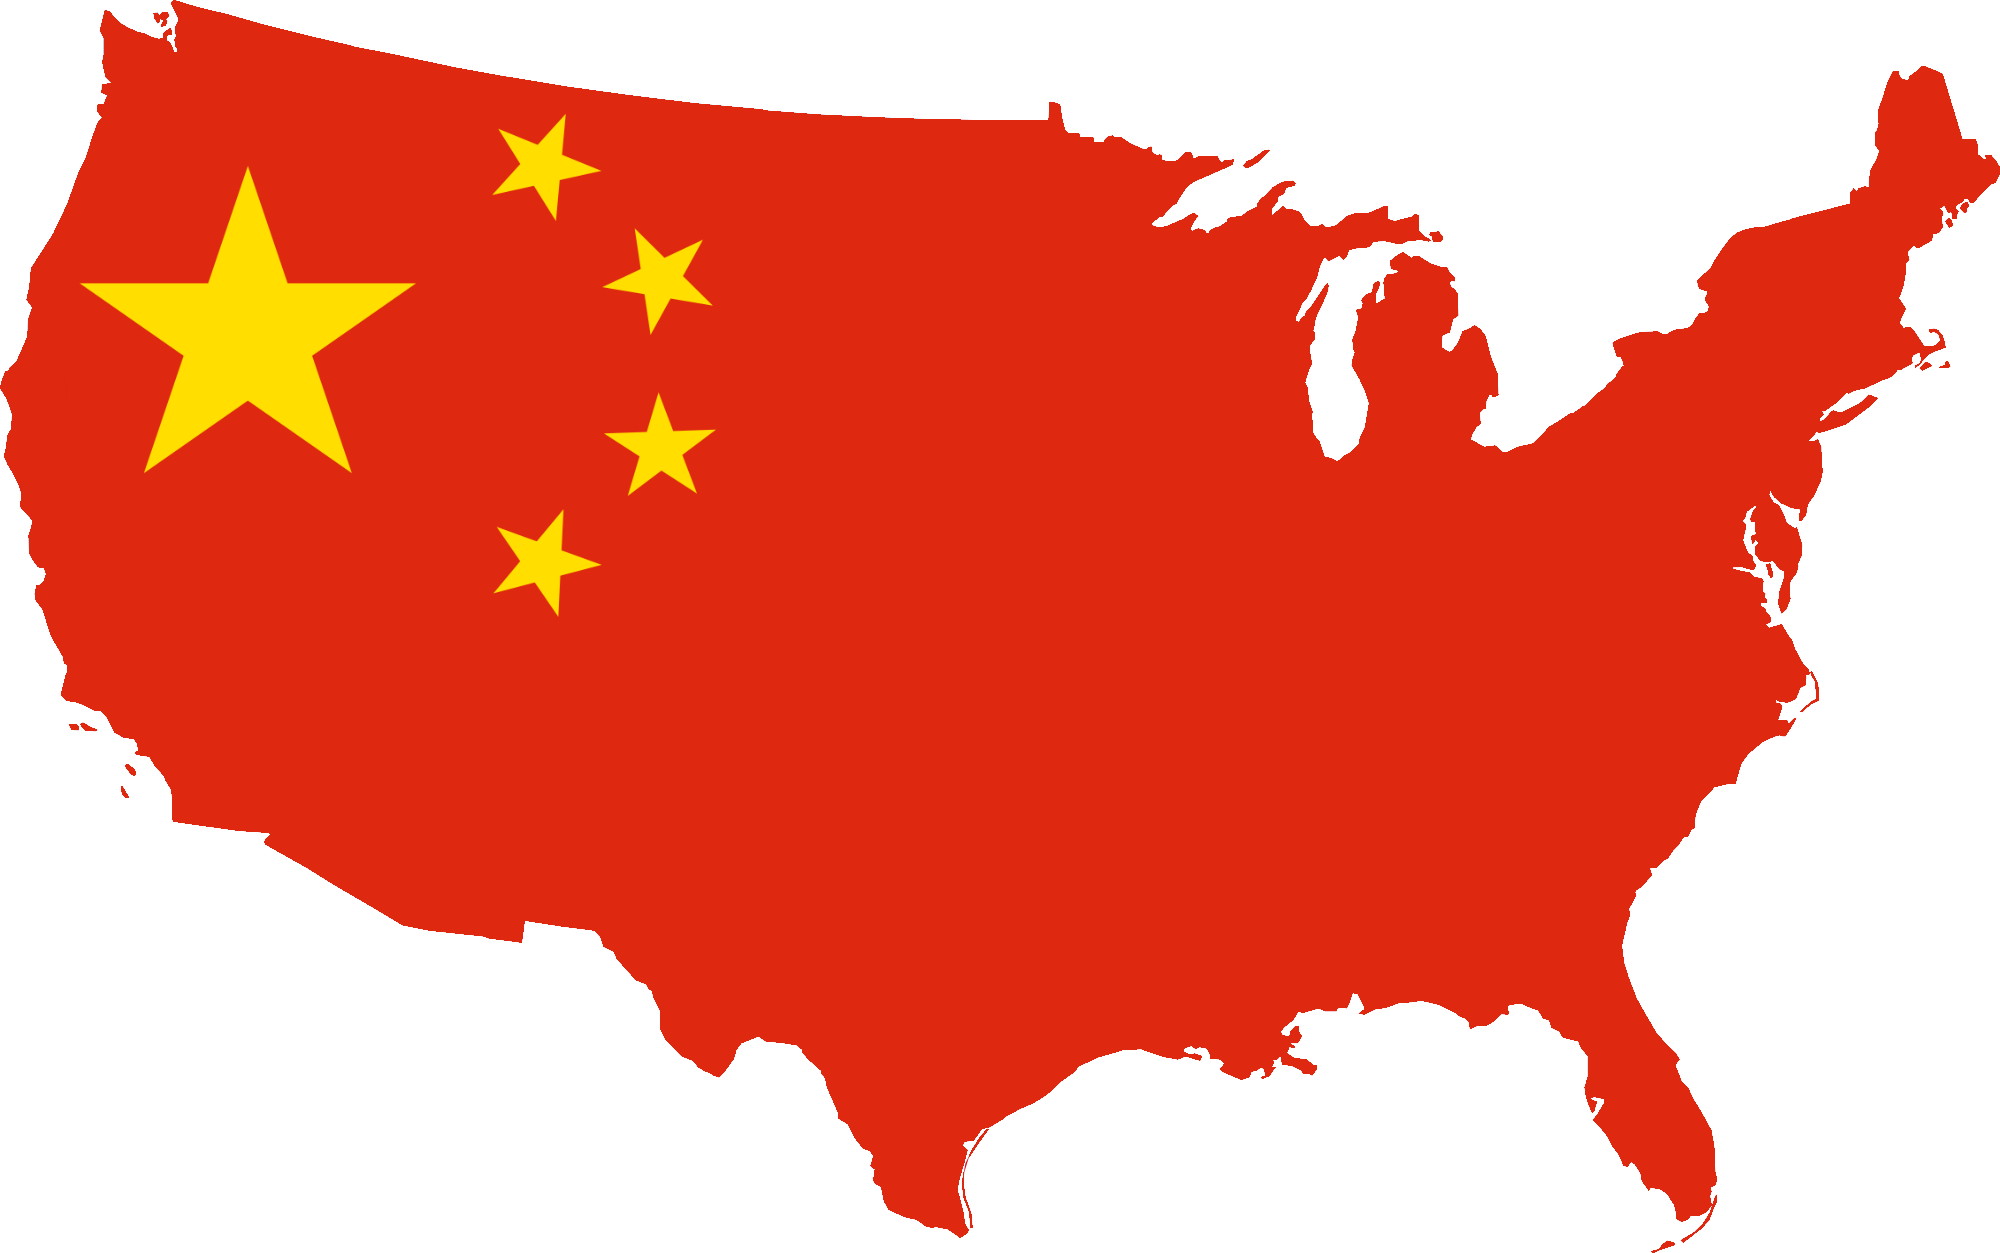 China vs USA: A Clash of Cultures